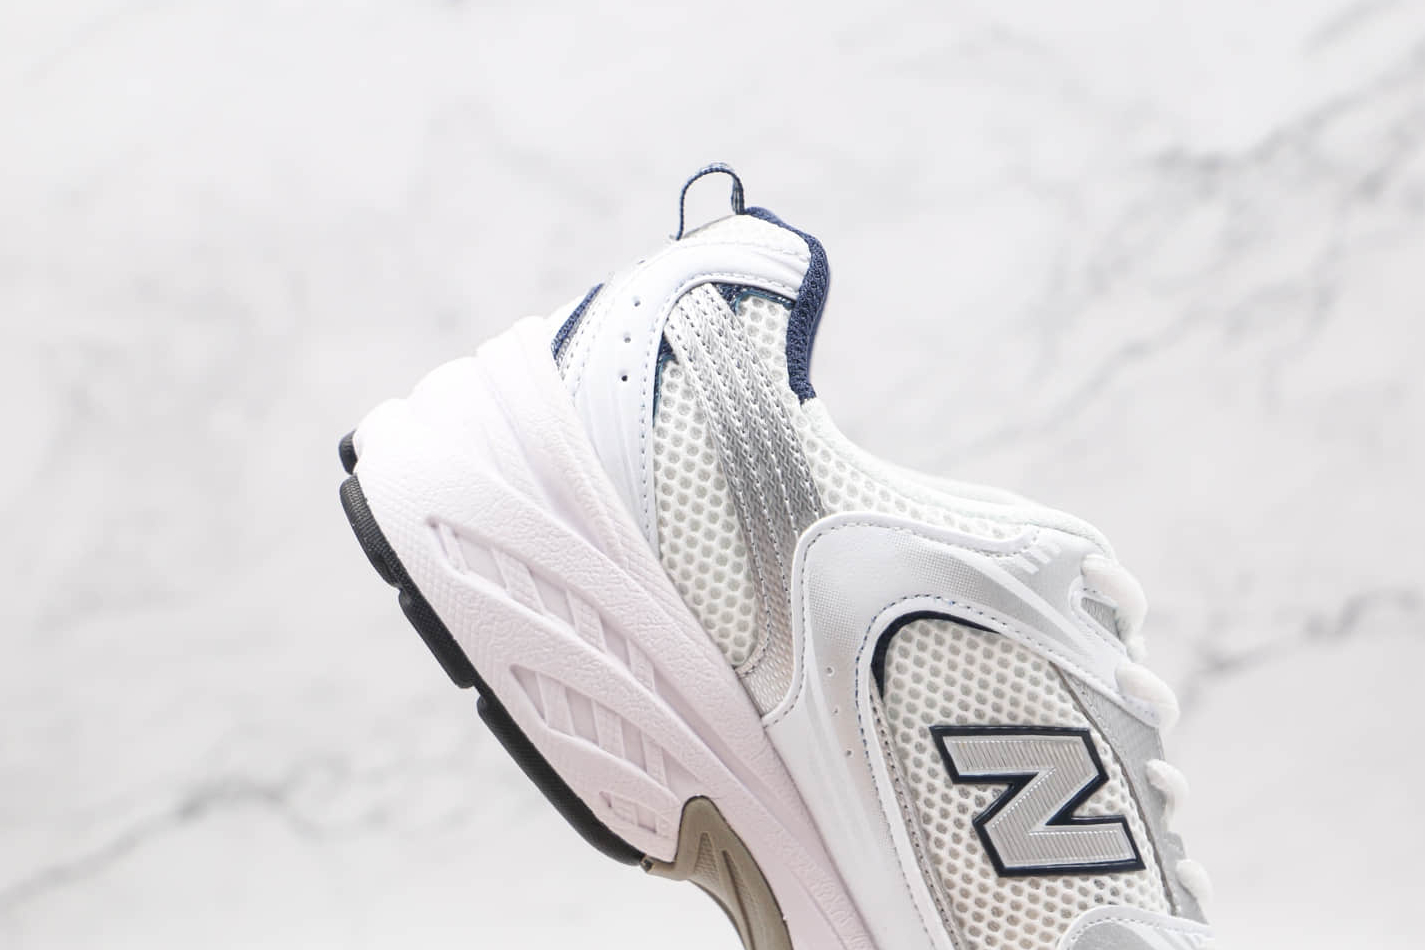 New Balance MR530SG 'Munsell White Ginger Pink' MR530ESD - Stylish and Comfy Sneakers